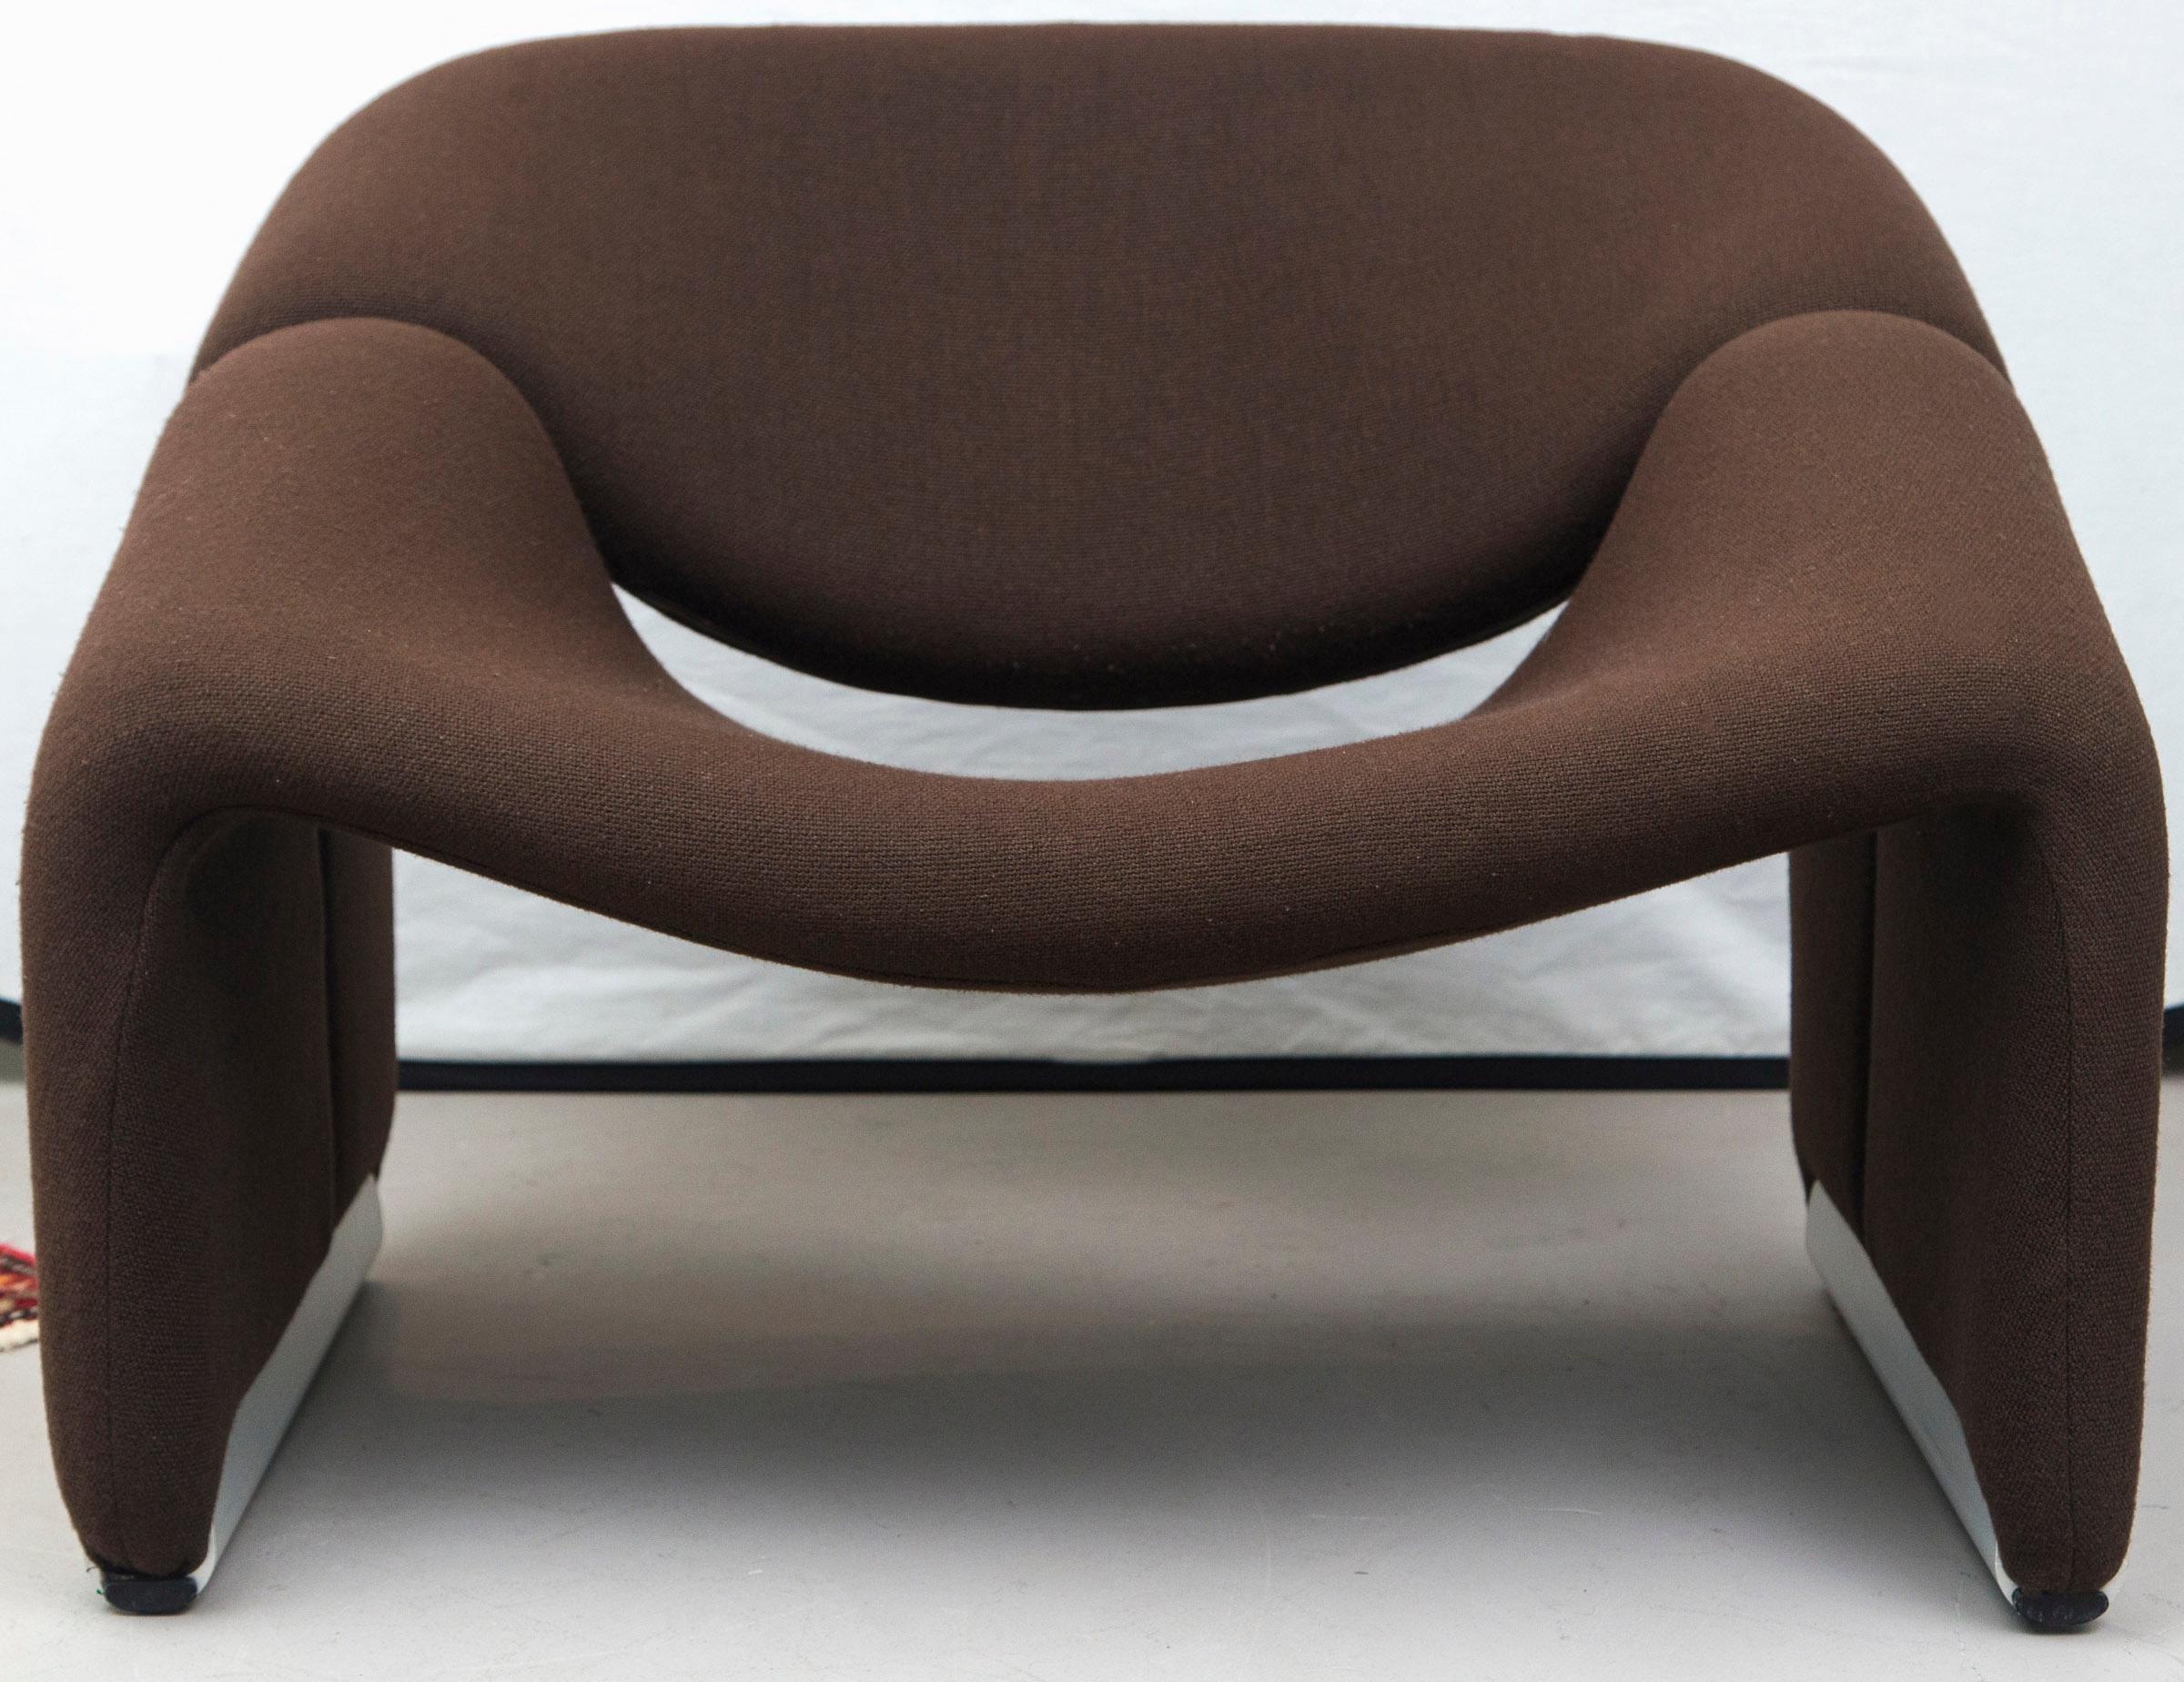 The Groovy chair, or F598, was designed in 1973 by France's top designer Pierre Paulin for Holland's most Avant Garde furniture maker Artifort.

This pair sits on silver colored feet and is upholstered with a brown woollen fabric.